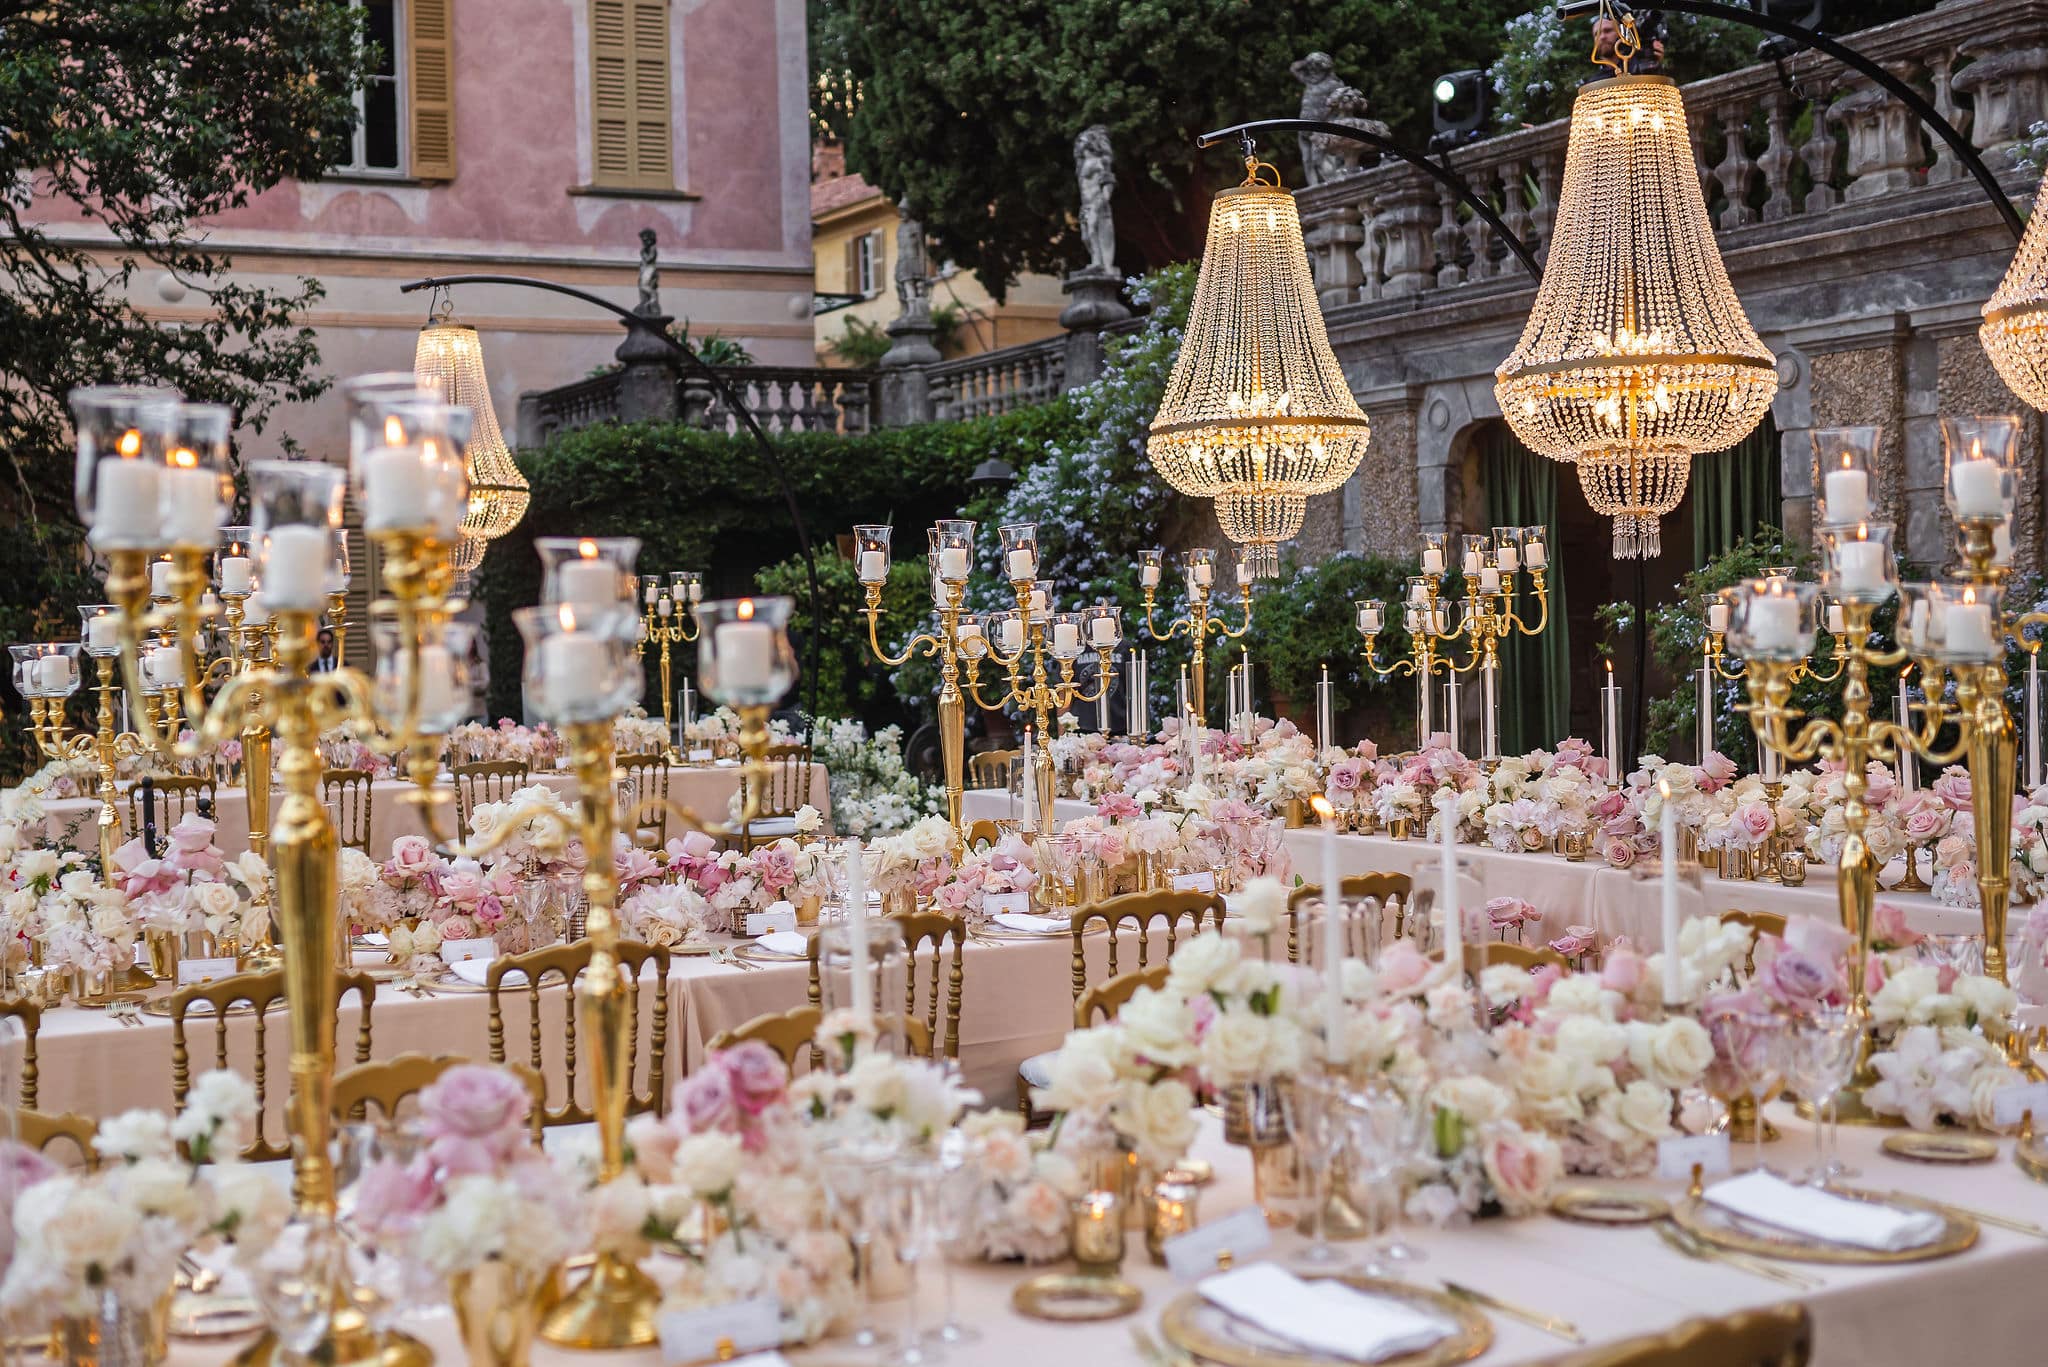 Luxury tables with pastel flowers and gold candelabras